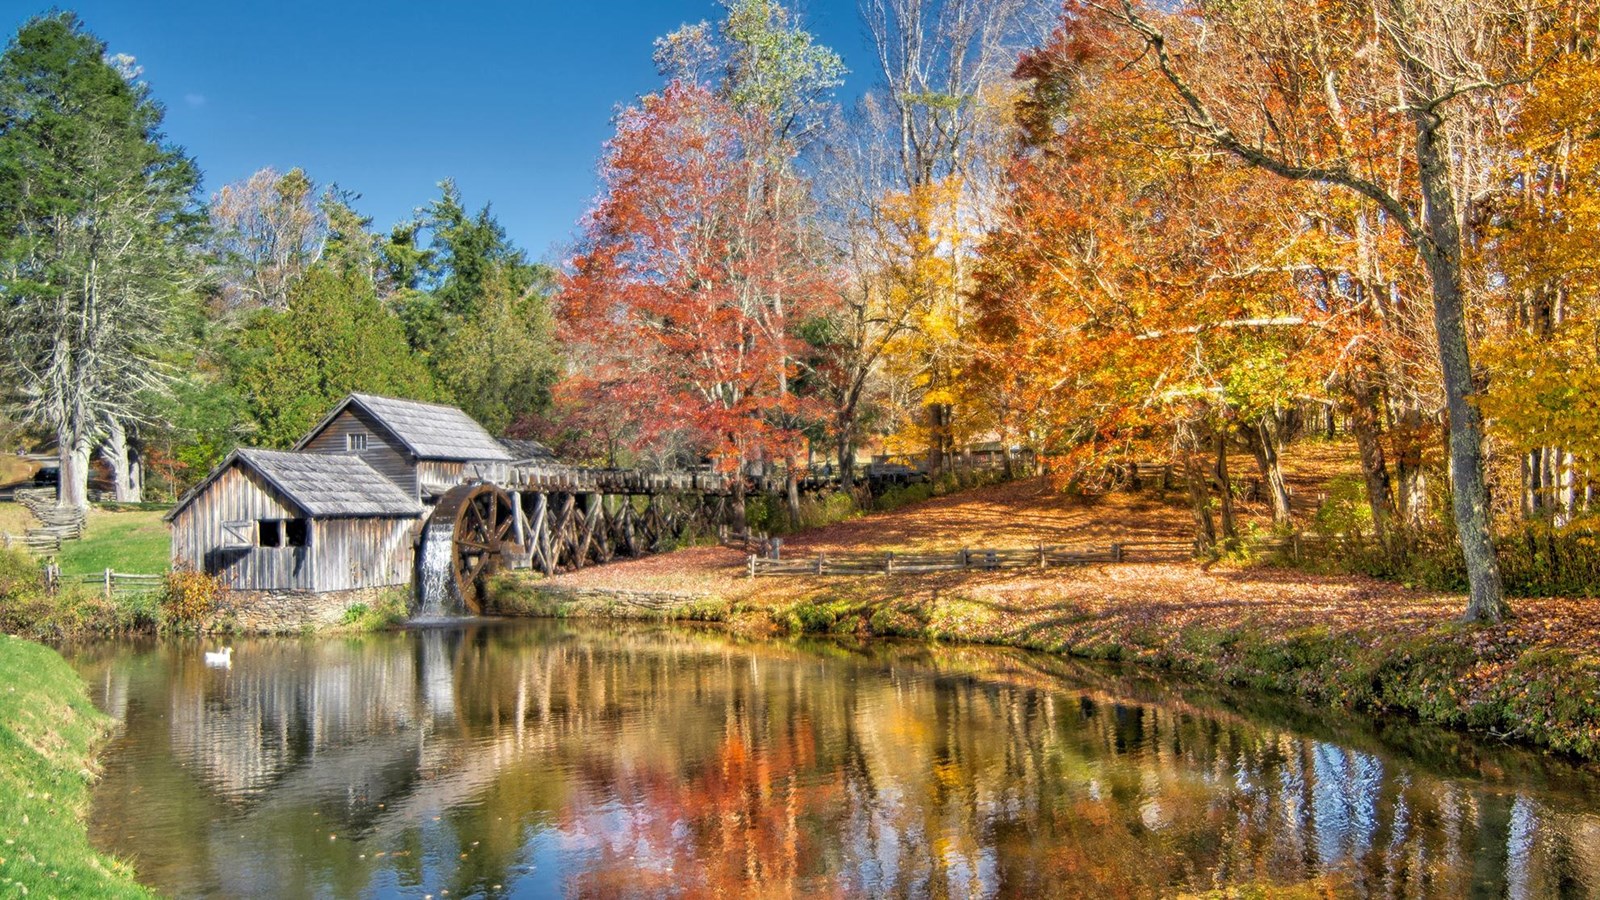 Autumn colors reflect in the water on a mill pond. On the far bank sits an old, weathered mill